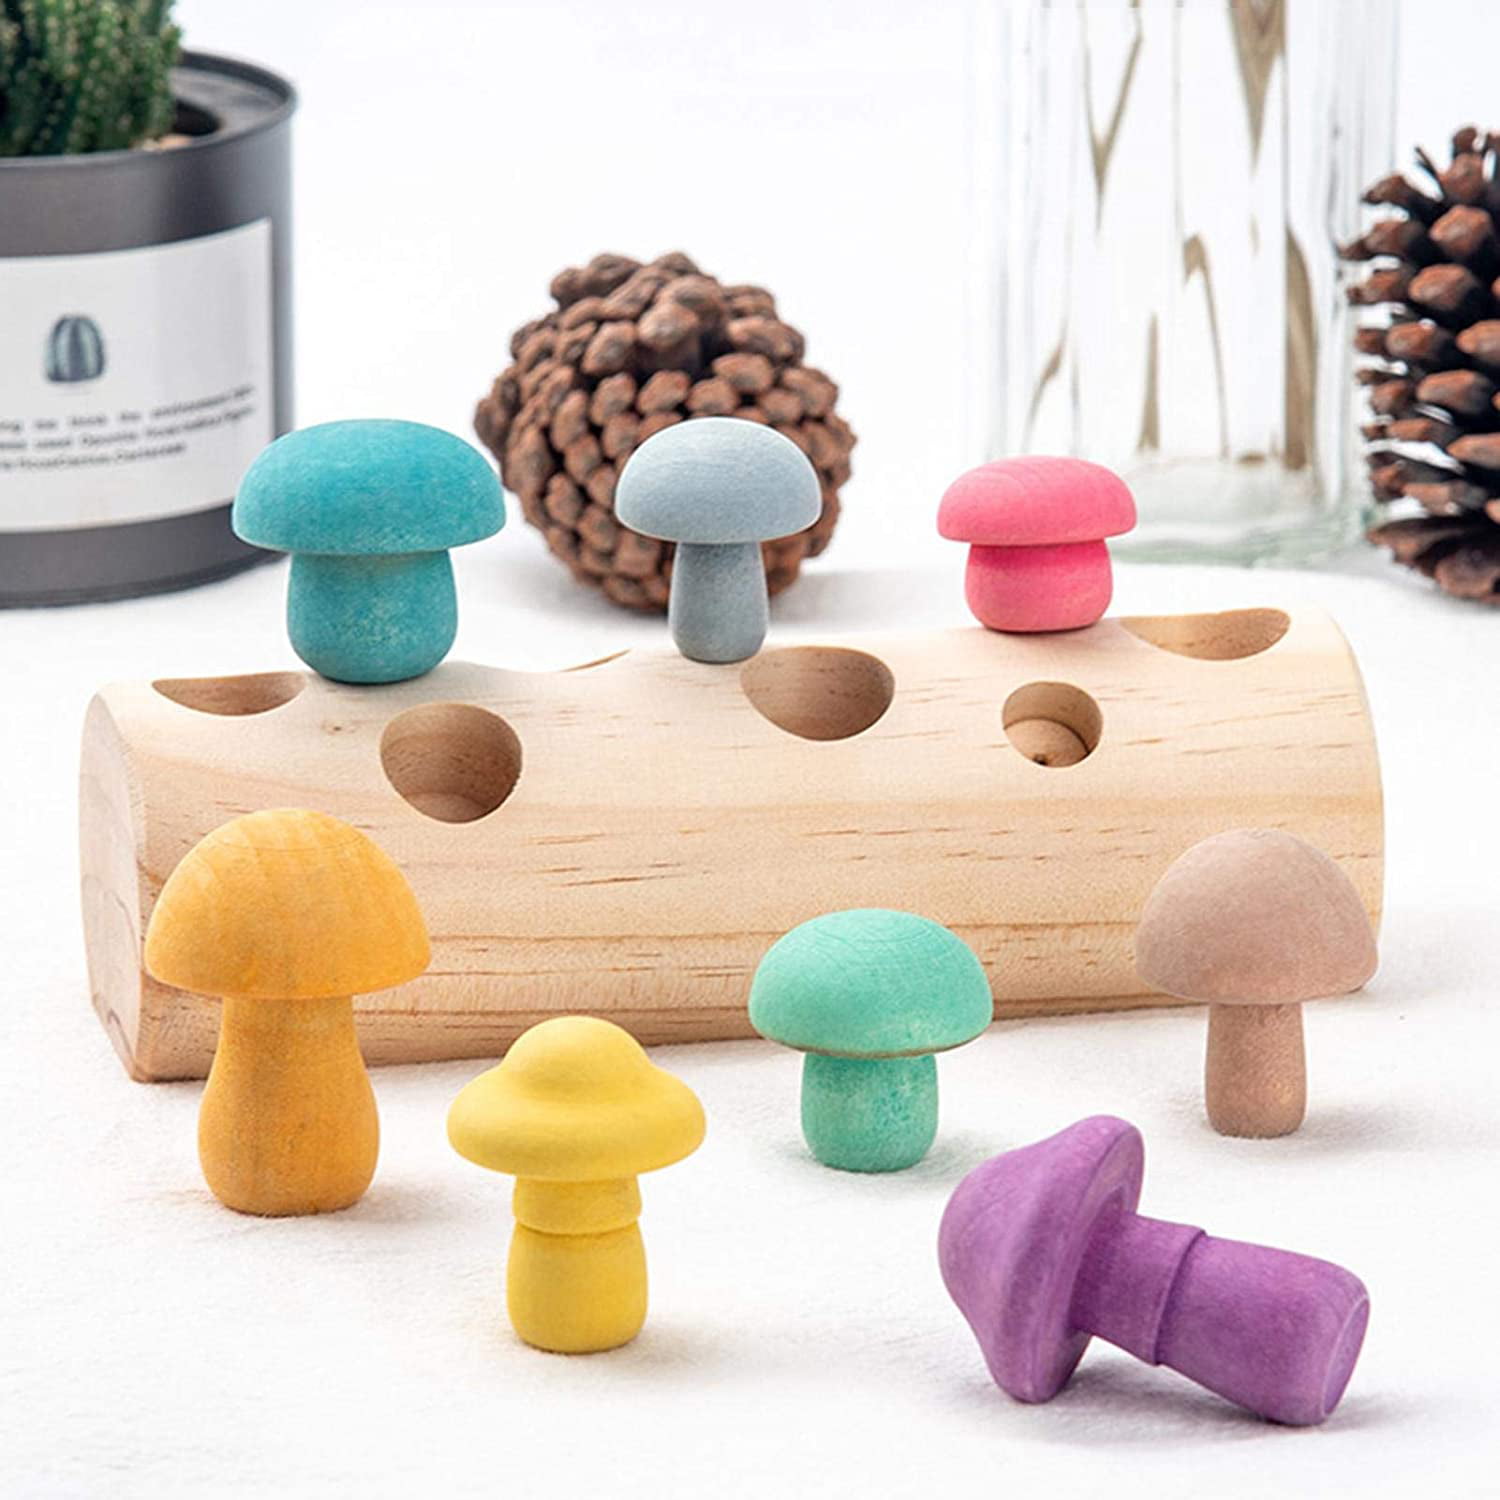 kekafu Mushroom Picking Game Colorful Wooden Mushroom Toys Picking Mushroom Matching Toys Shape Sorting Game Concentration Training Toys Learning Educational Toys for Kids Infants Toddlers 